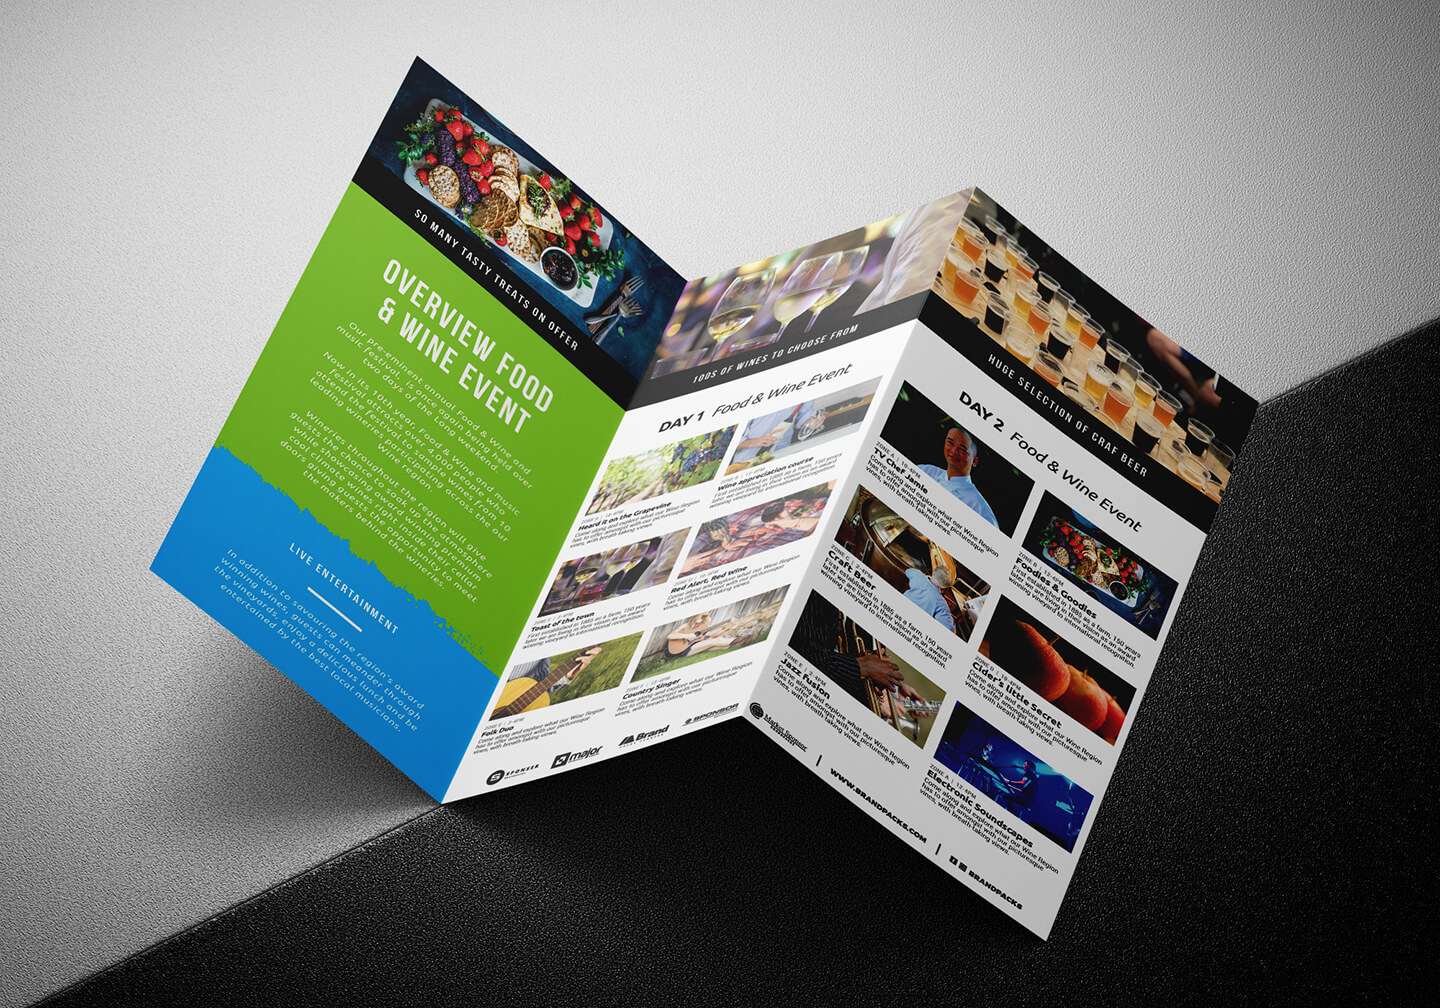 Free Tri Fold Brochure Template For Events & Festivals – Psd For Tri Fold Brochure Template Illustrator